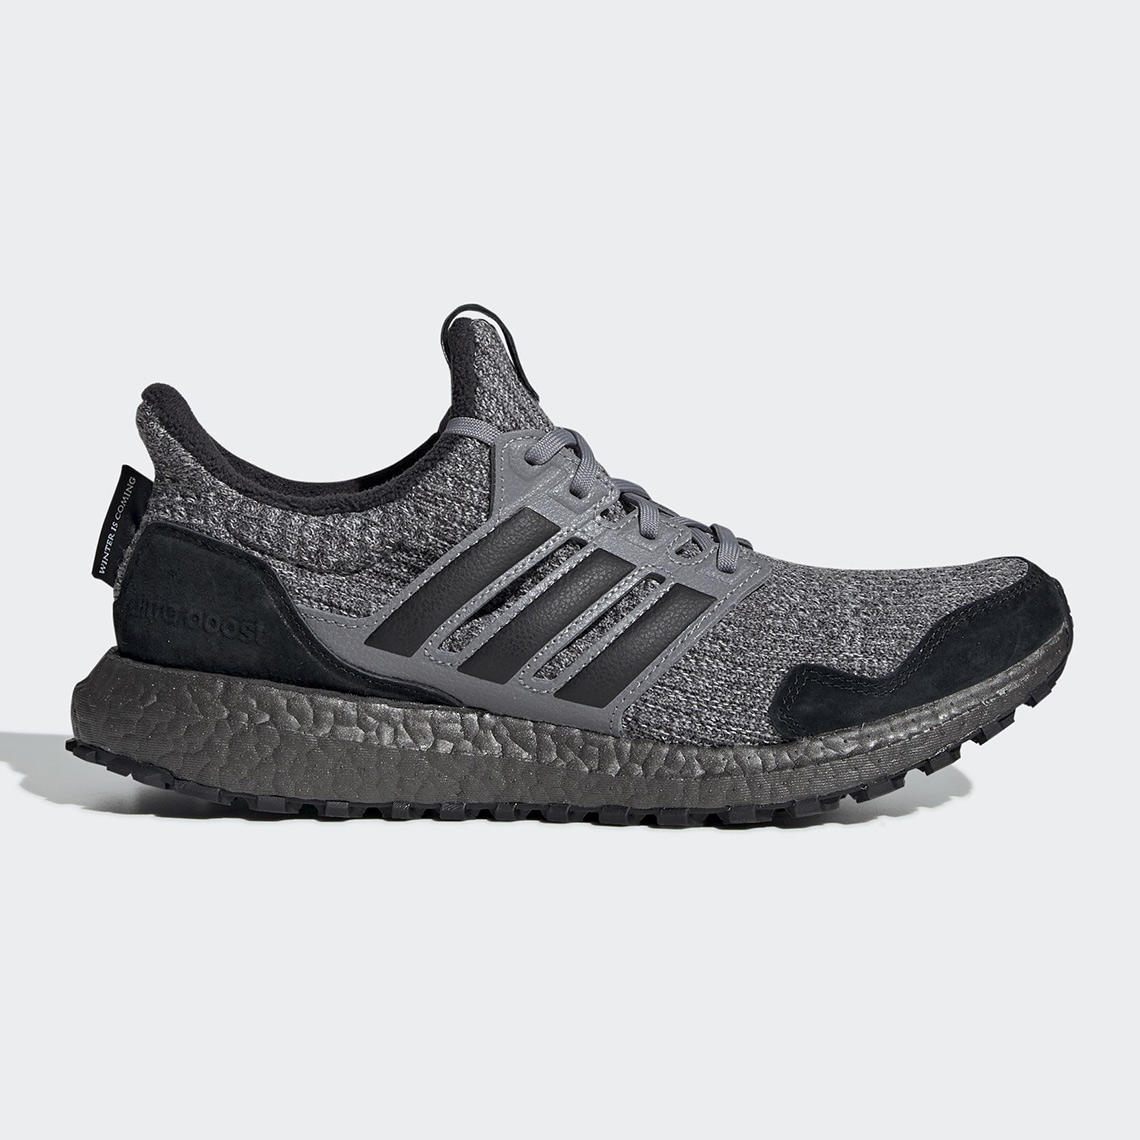 adidas game of thrones pre order